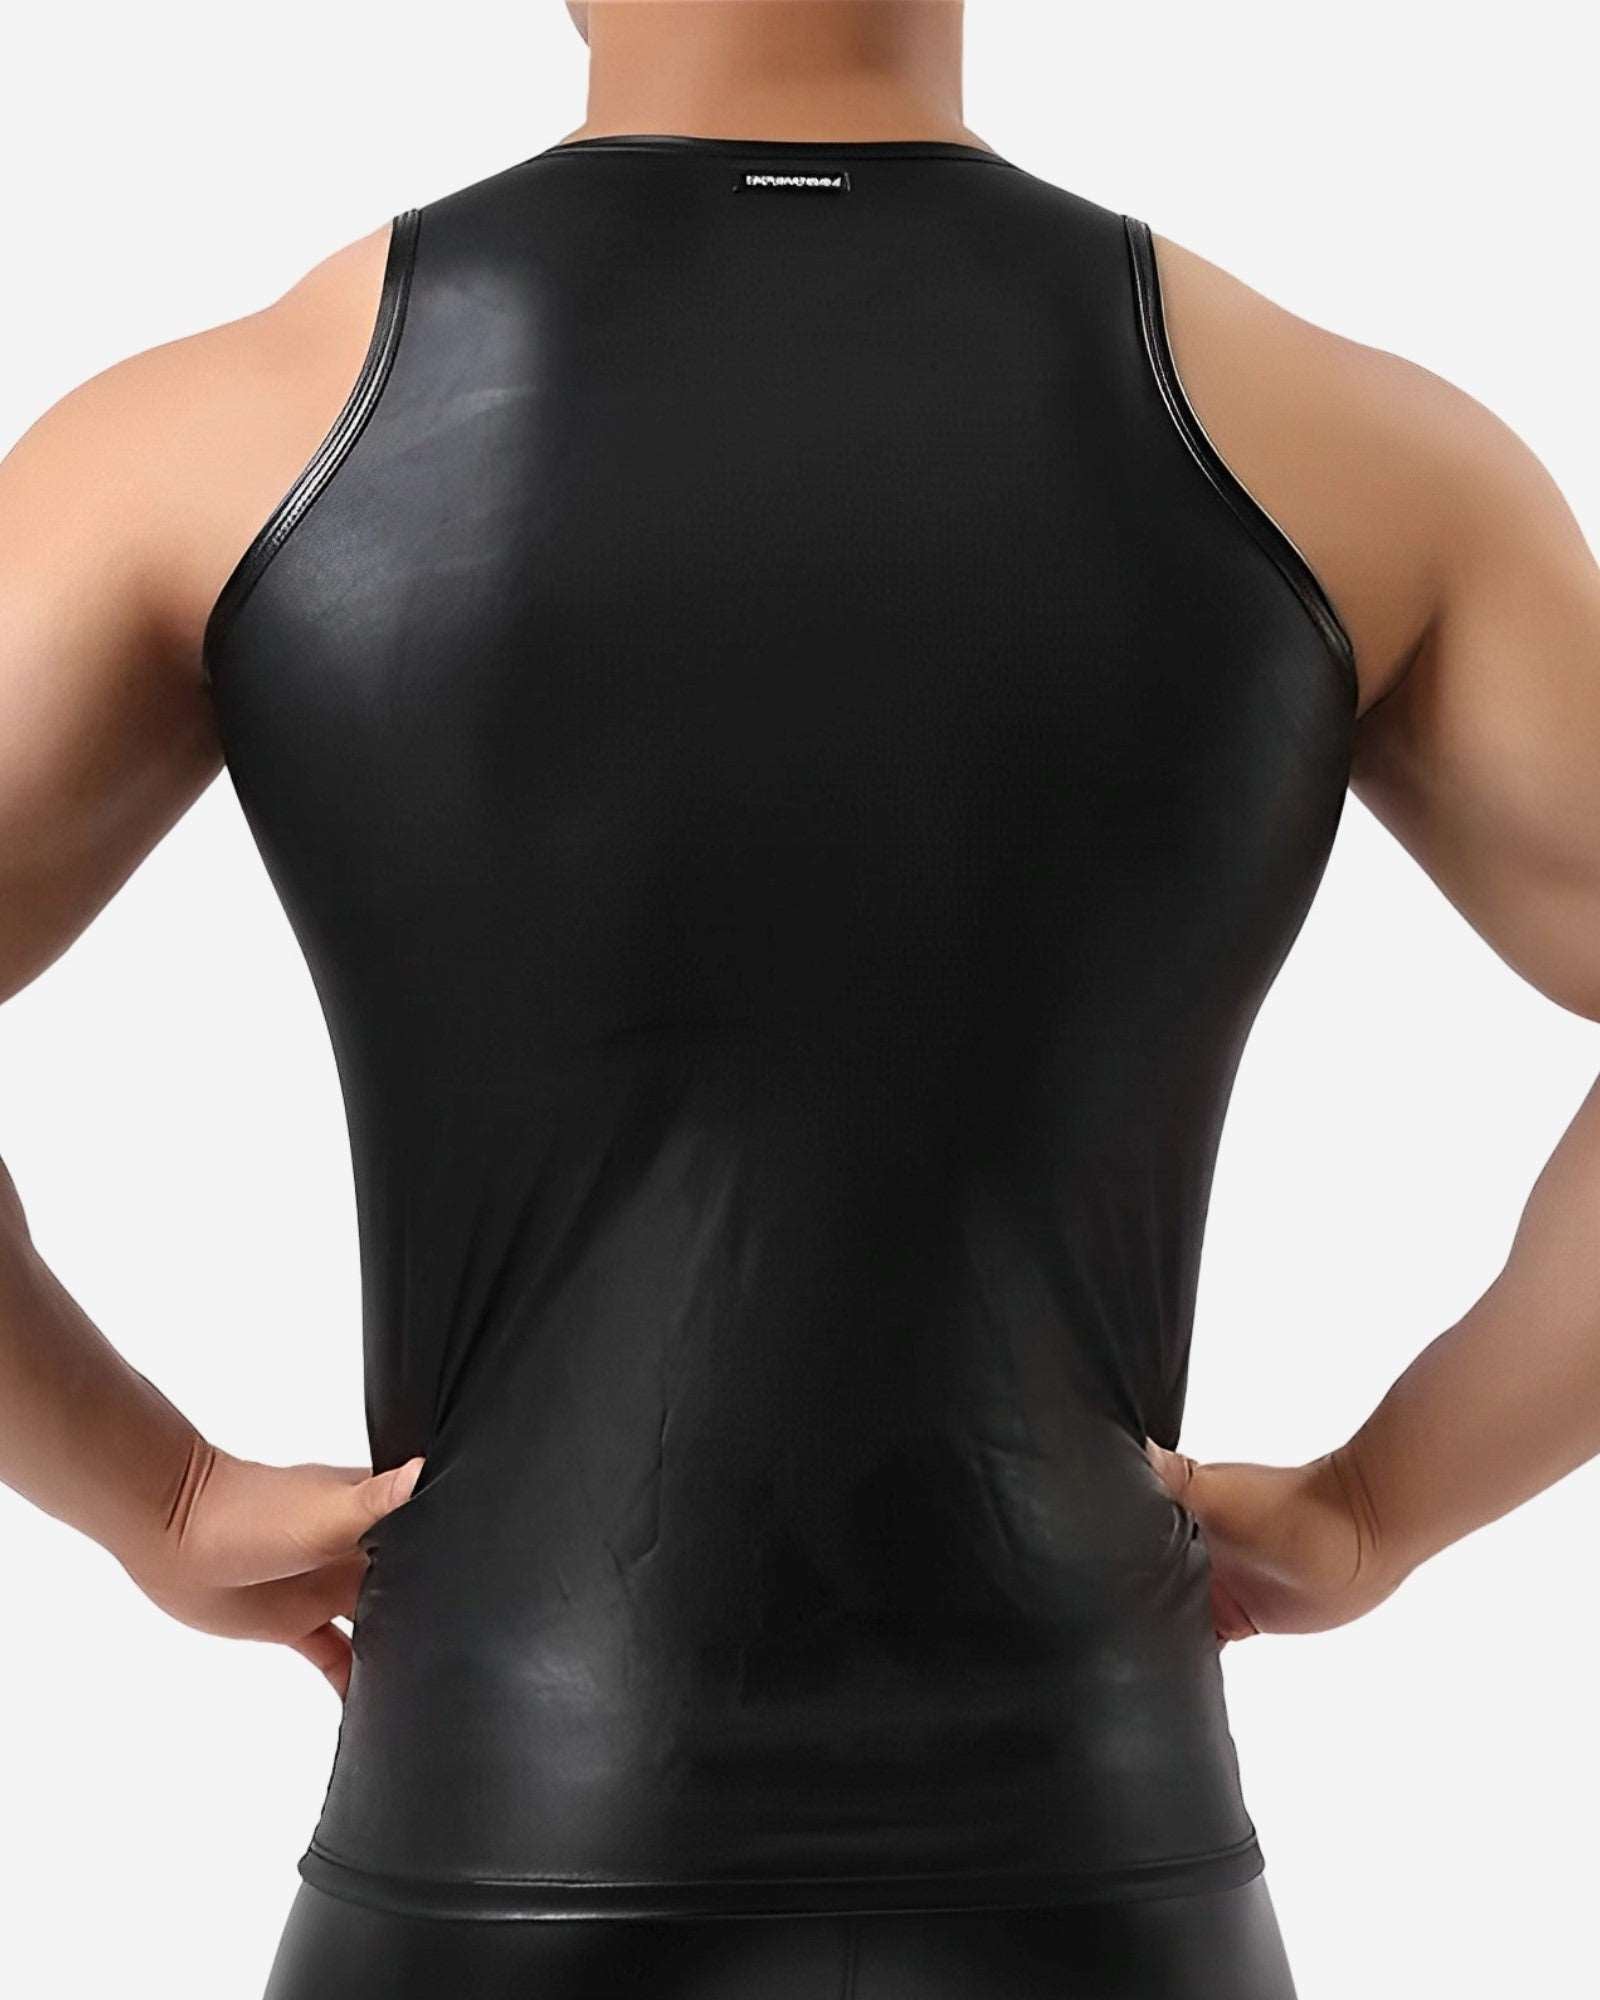 Shiny Leather Look Body Shirt 0 Leather Look Body Shirt